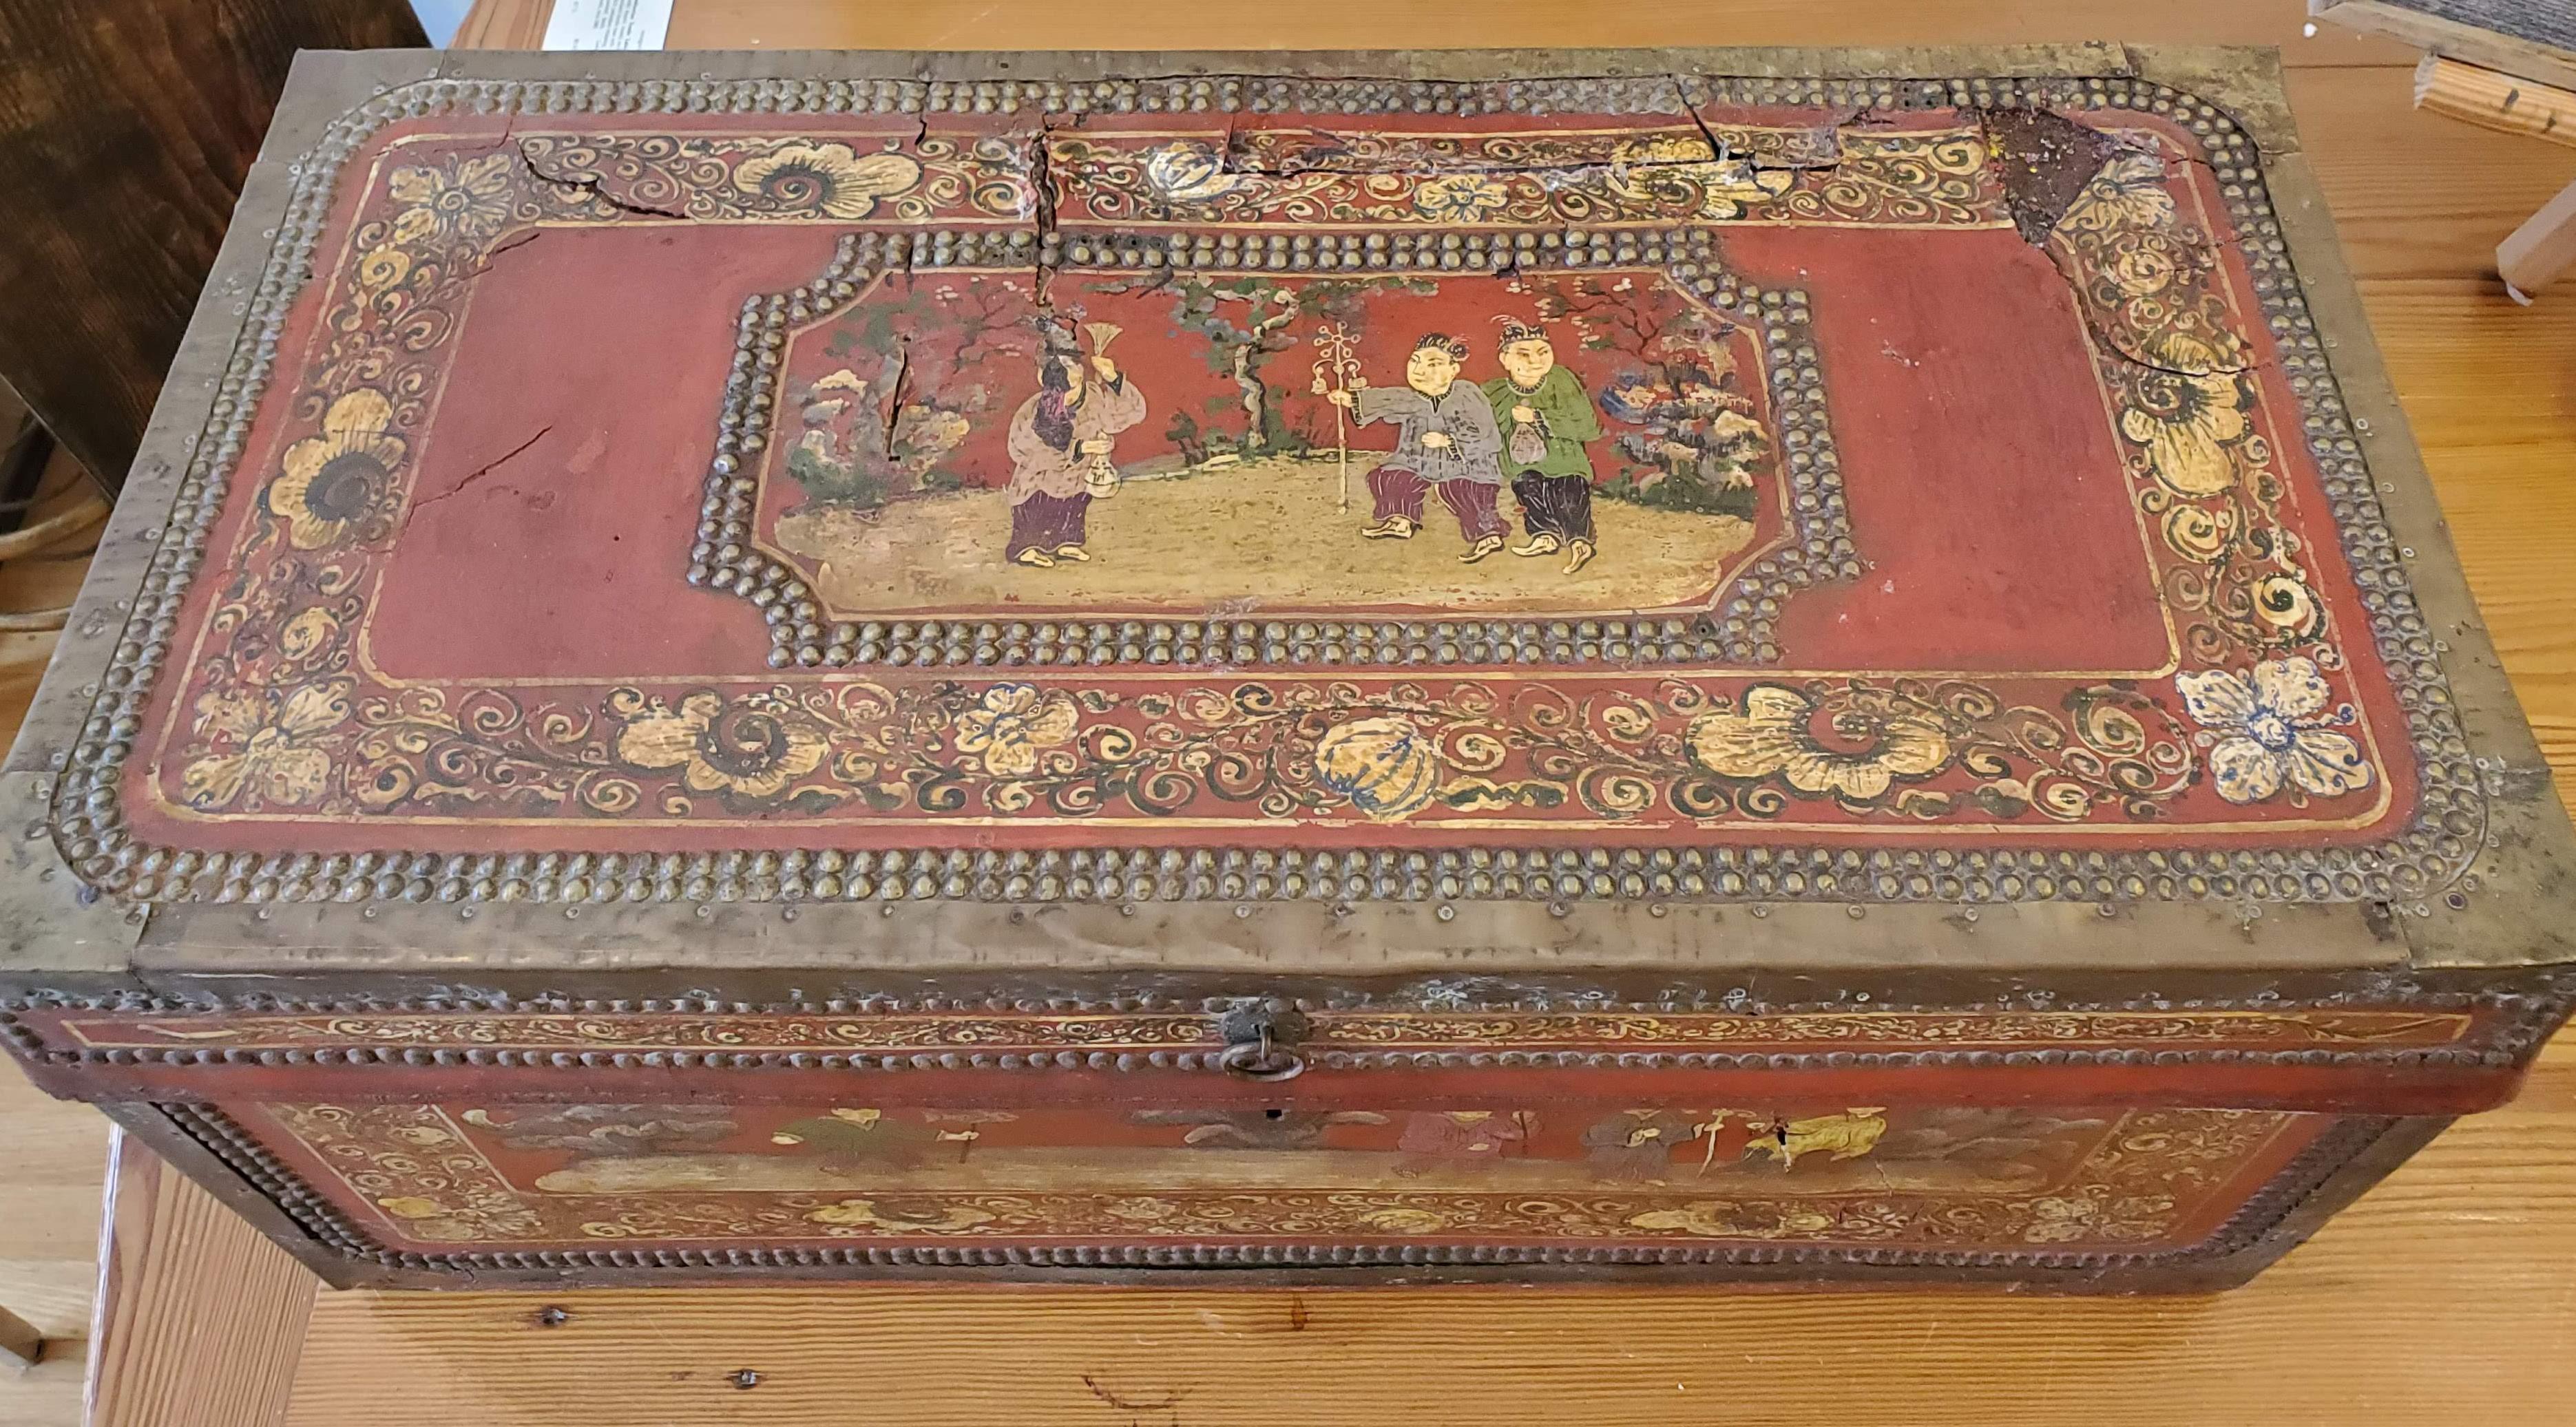 19th Century Chinese Export Brass Bound Leather Trunk with Hand Painted Designs 2